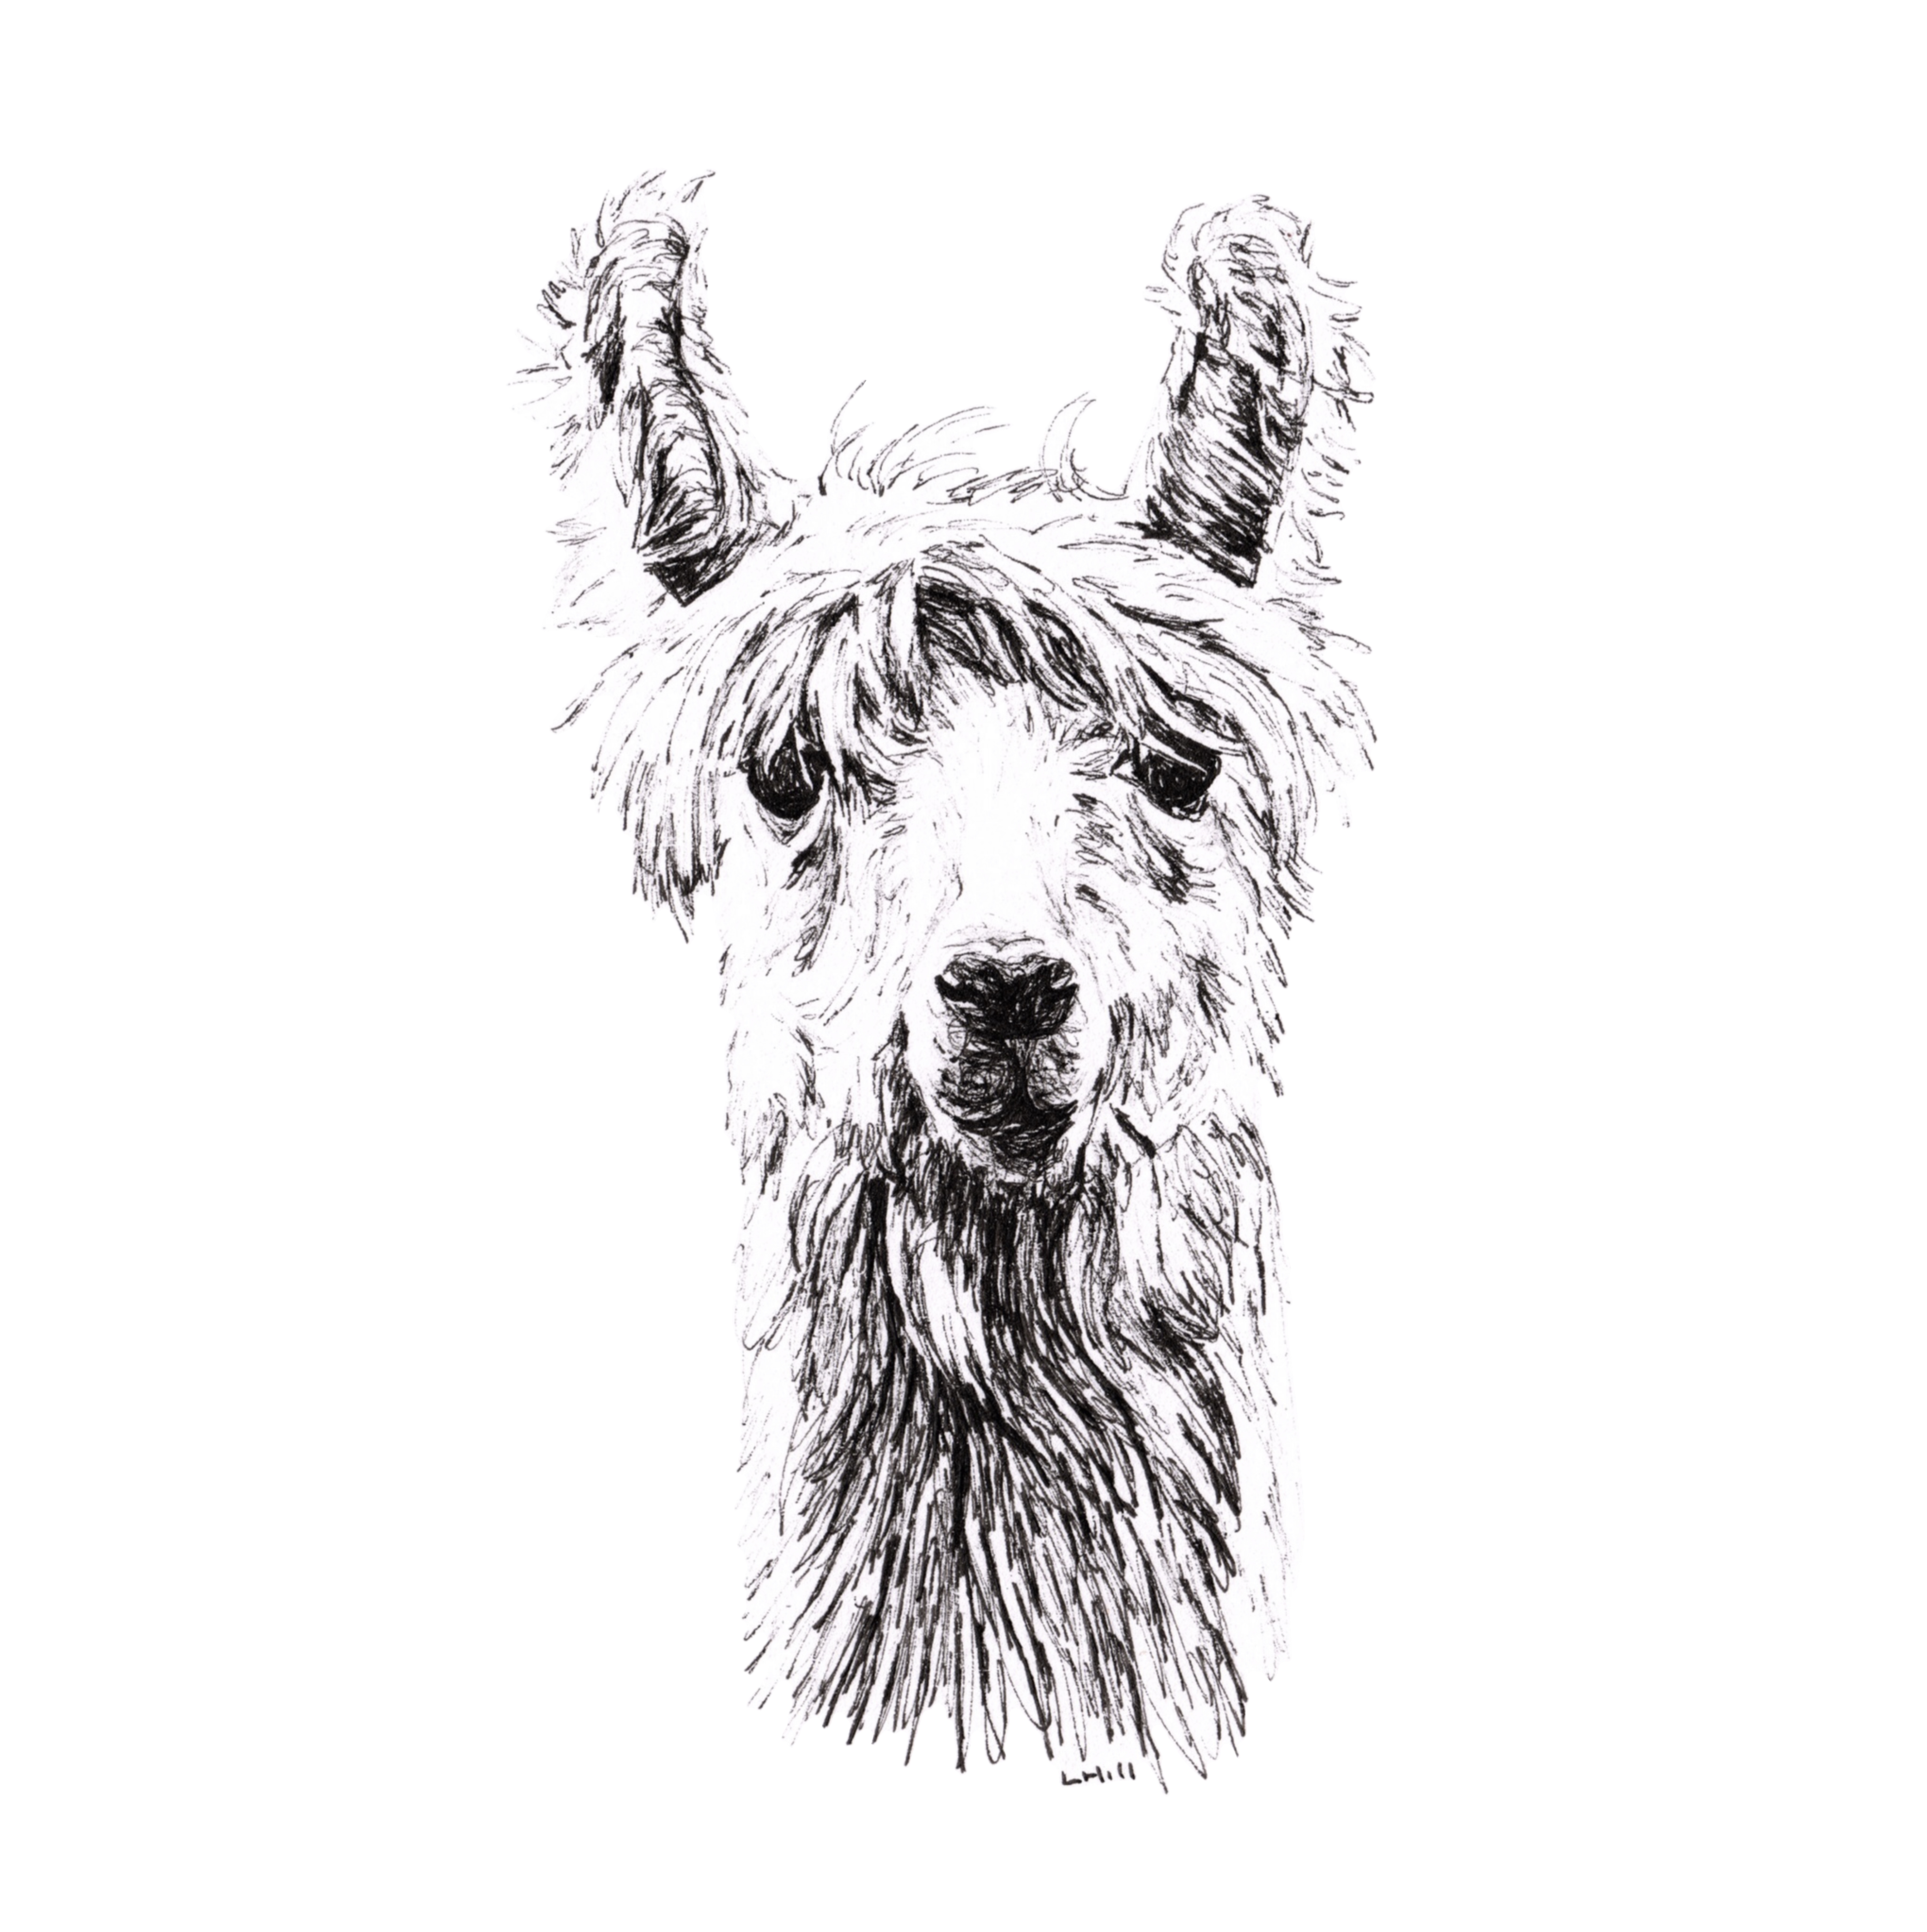 Llama pen and ink illustration by Louisa Hill